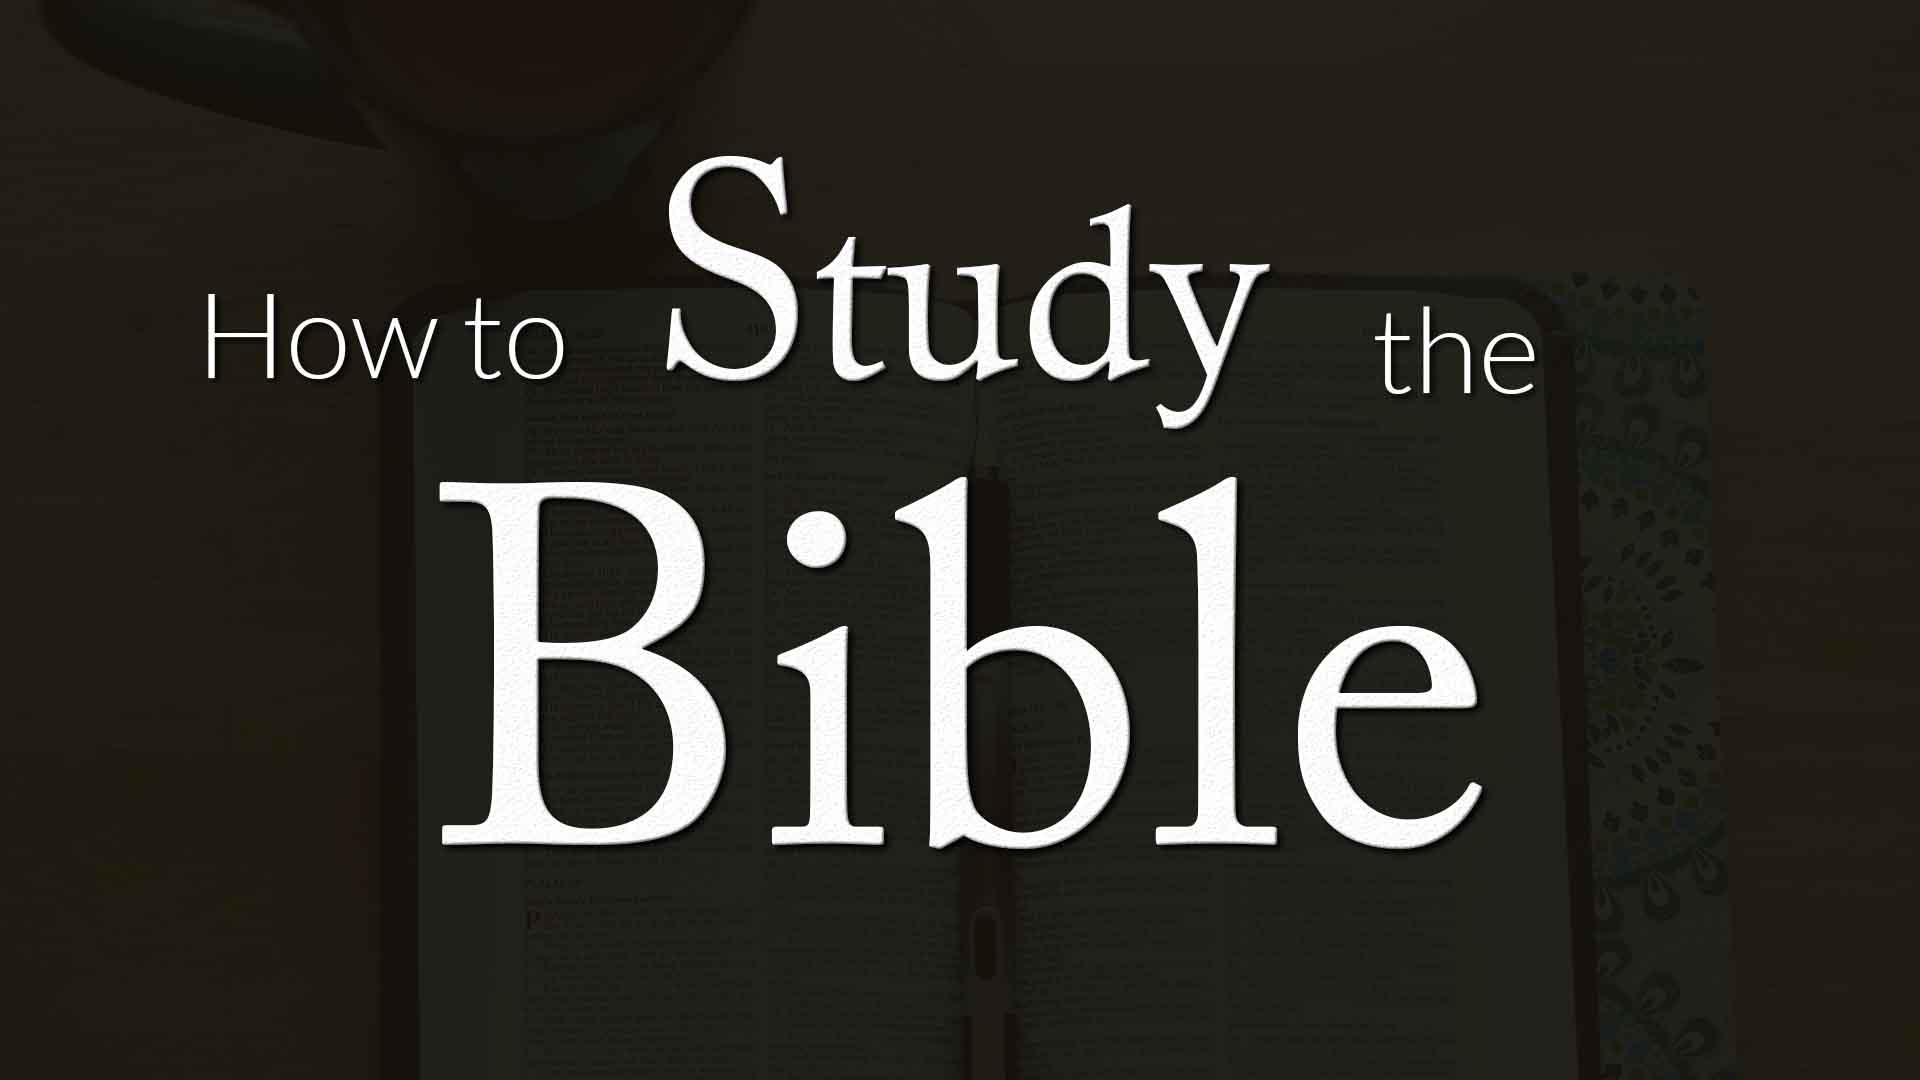 How To Study the Bible Video Series